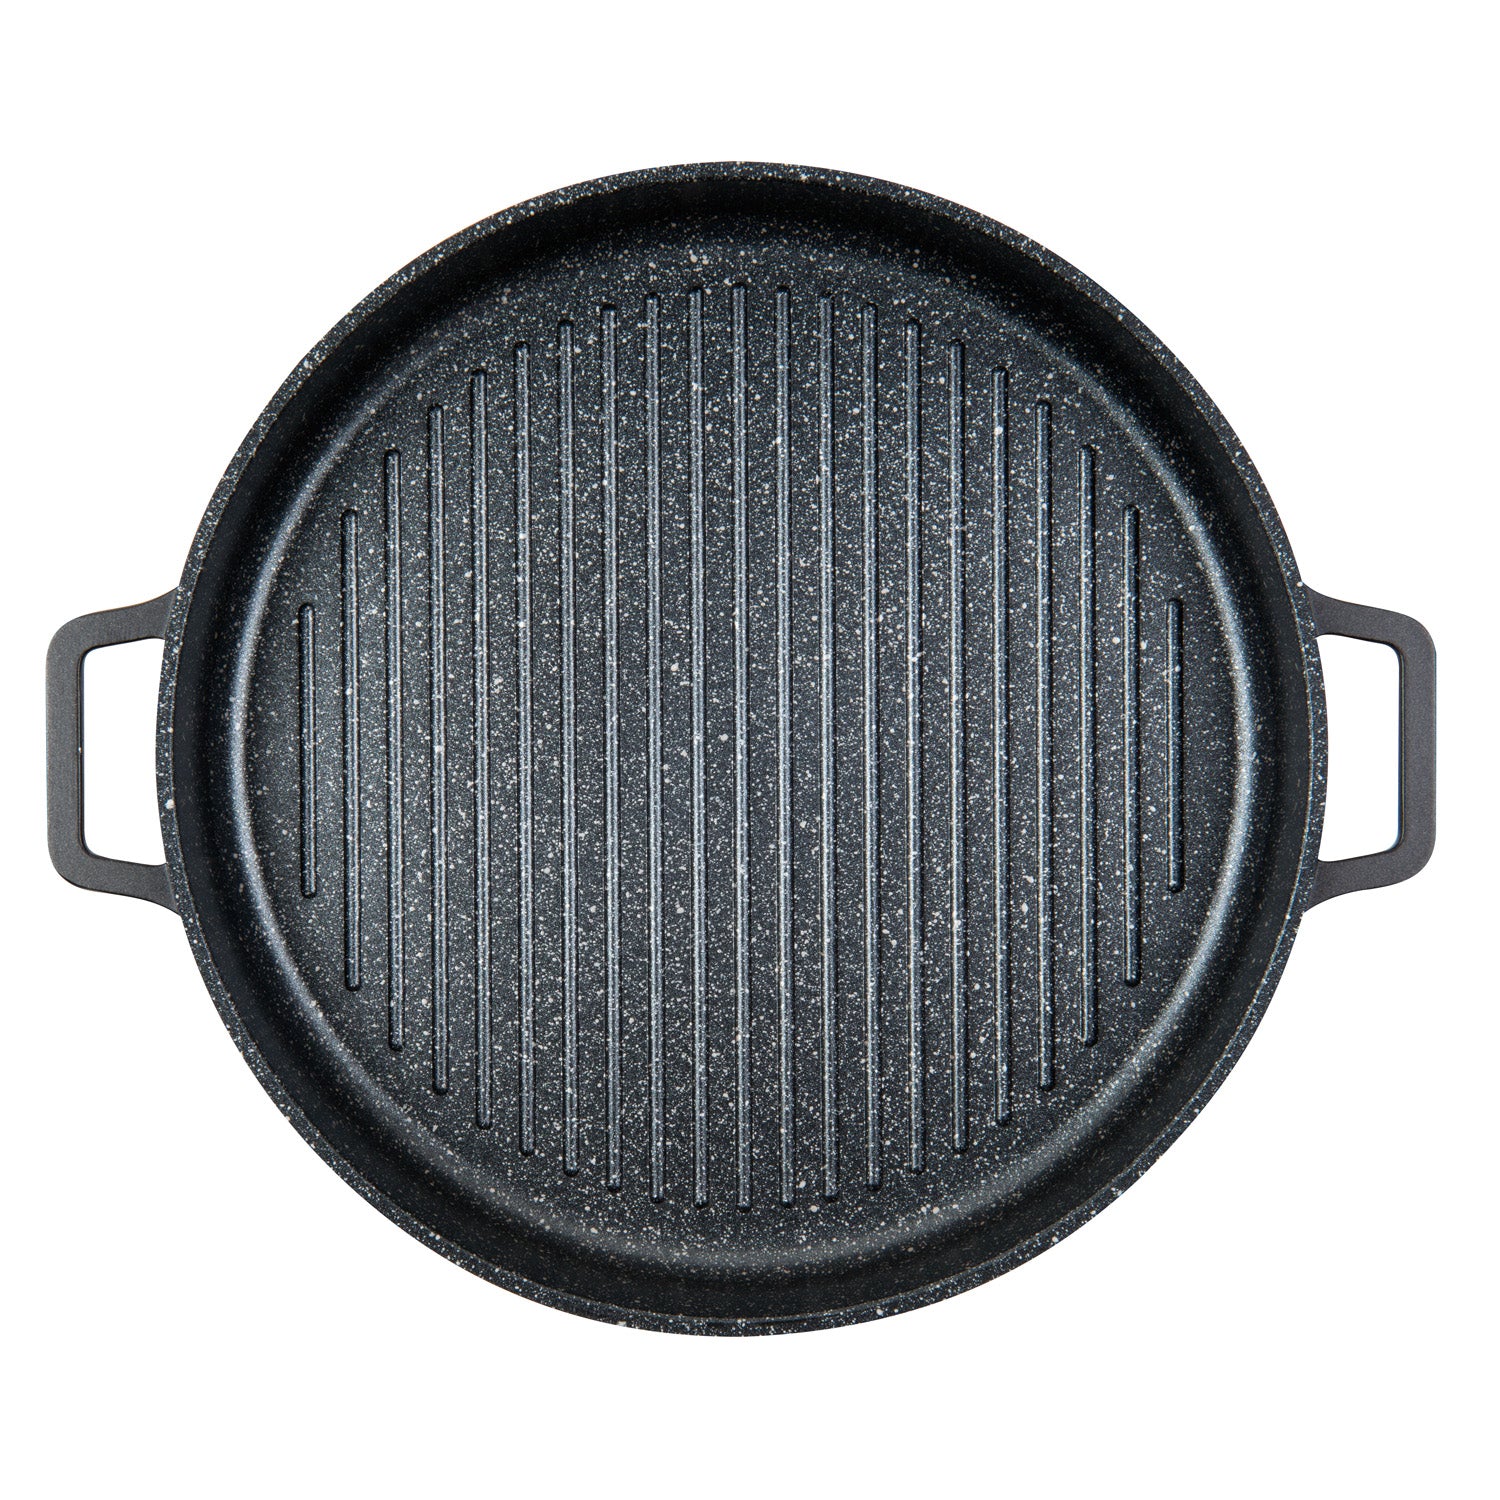 MasterPan Black Cast Aluminum 17 in Burner Grill Pan with Silicone Grips